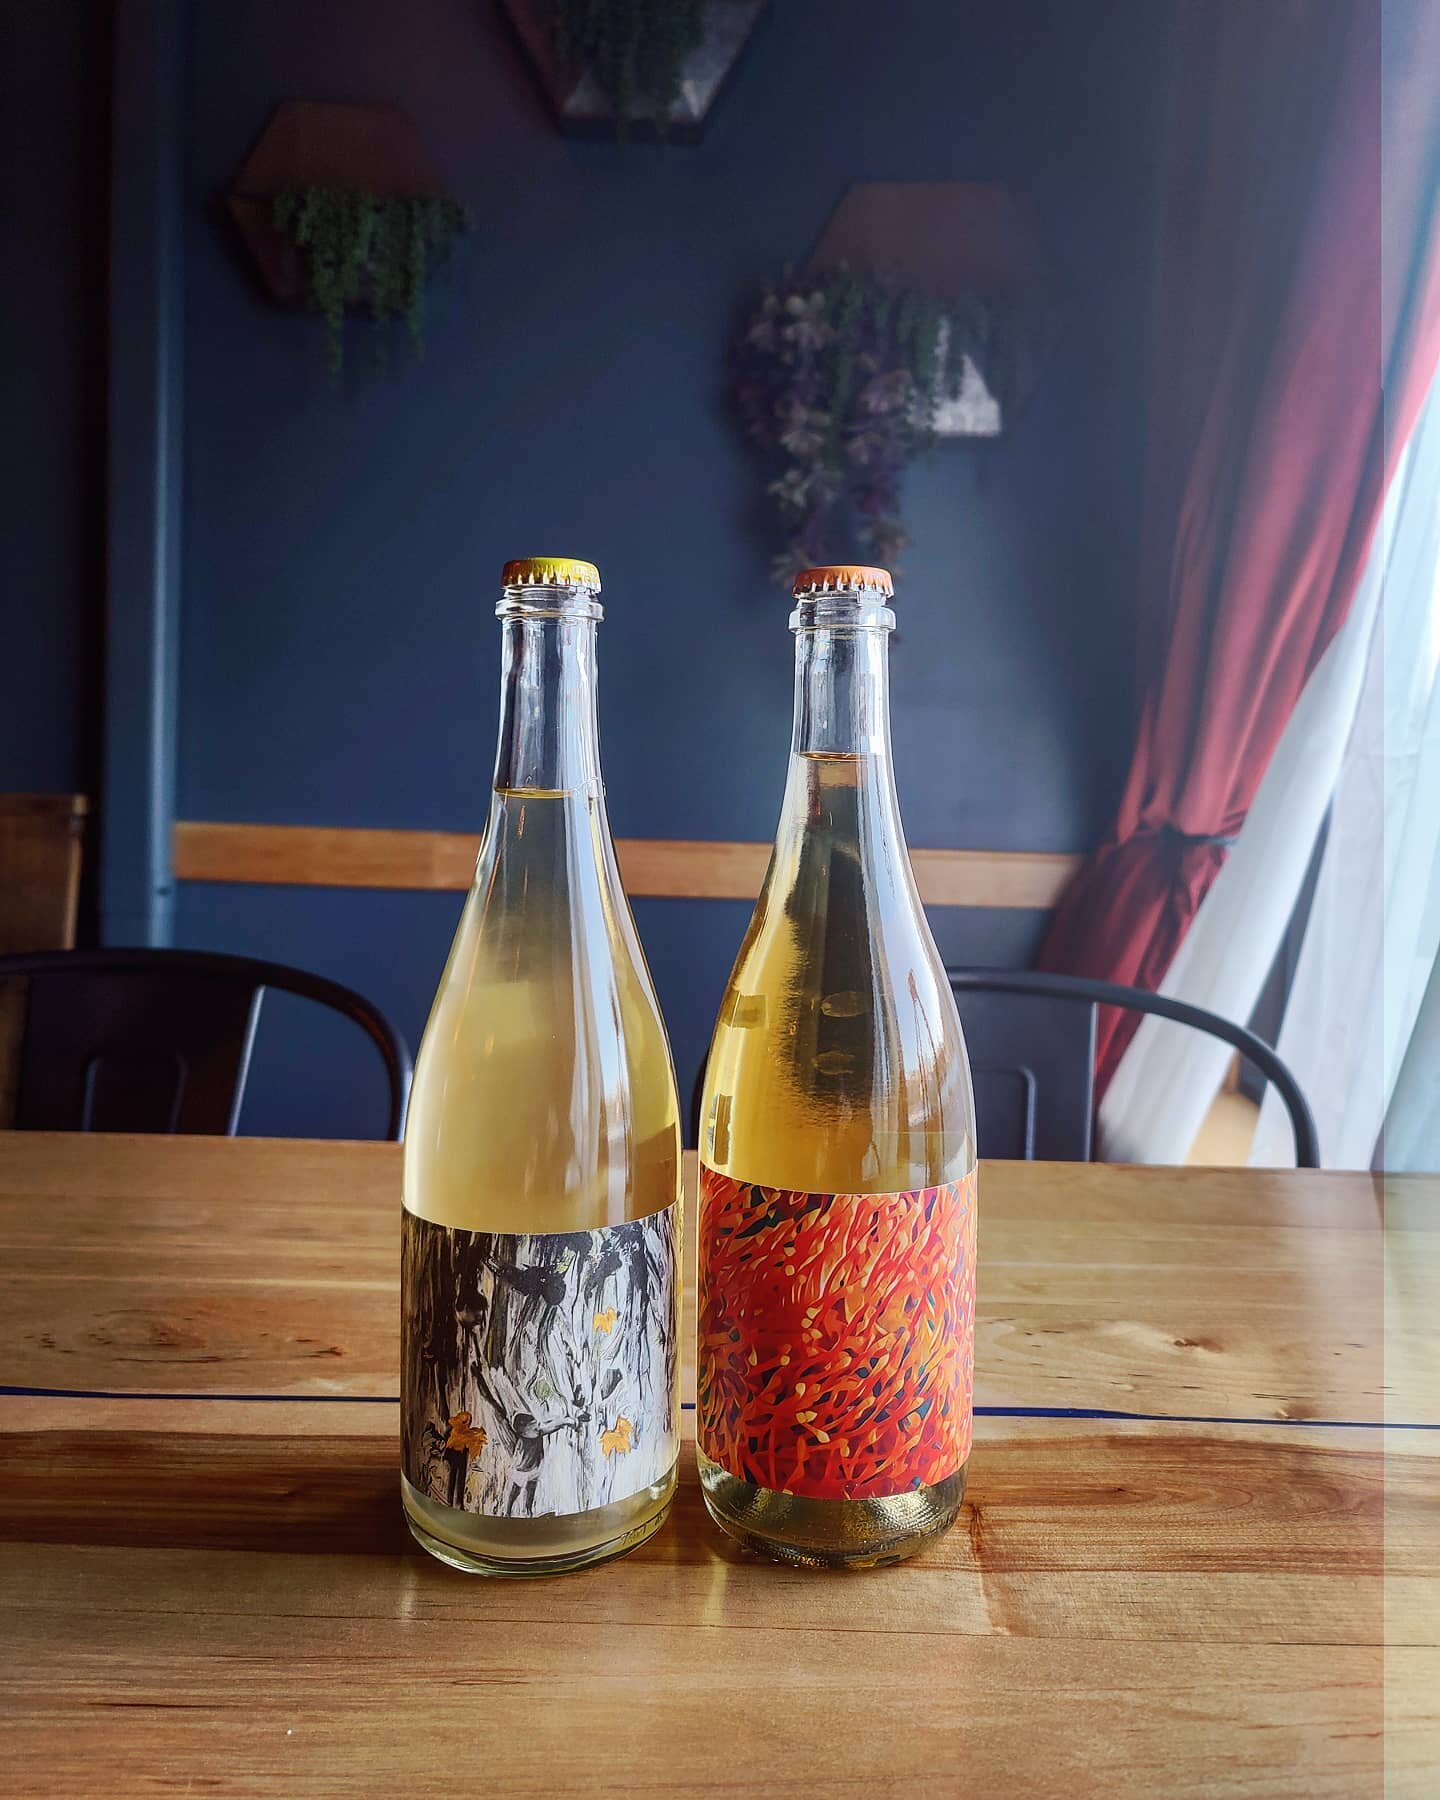 It's always the right season to drink pet-nats, but sometimes they're a bit tough to come by. We've got a whole bunch here and more coming in. These two beautiful newcomers are books worth judging by the cover, courtesy of @goncwinery and @bosmanwine